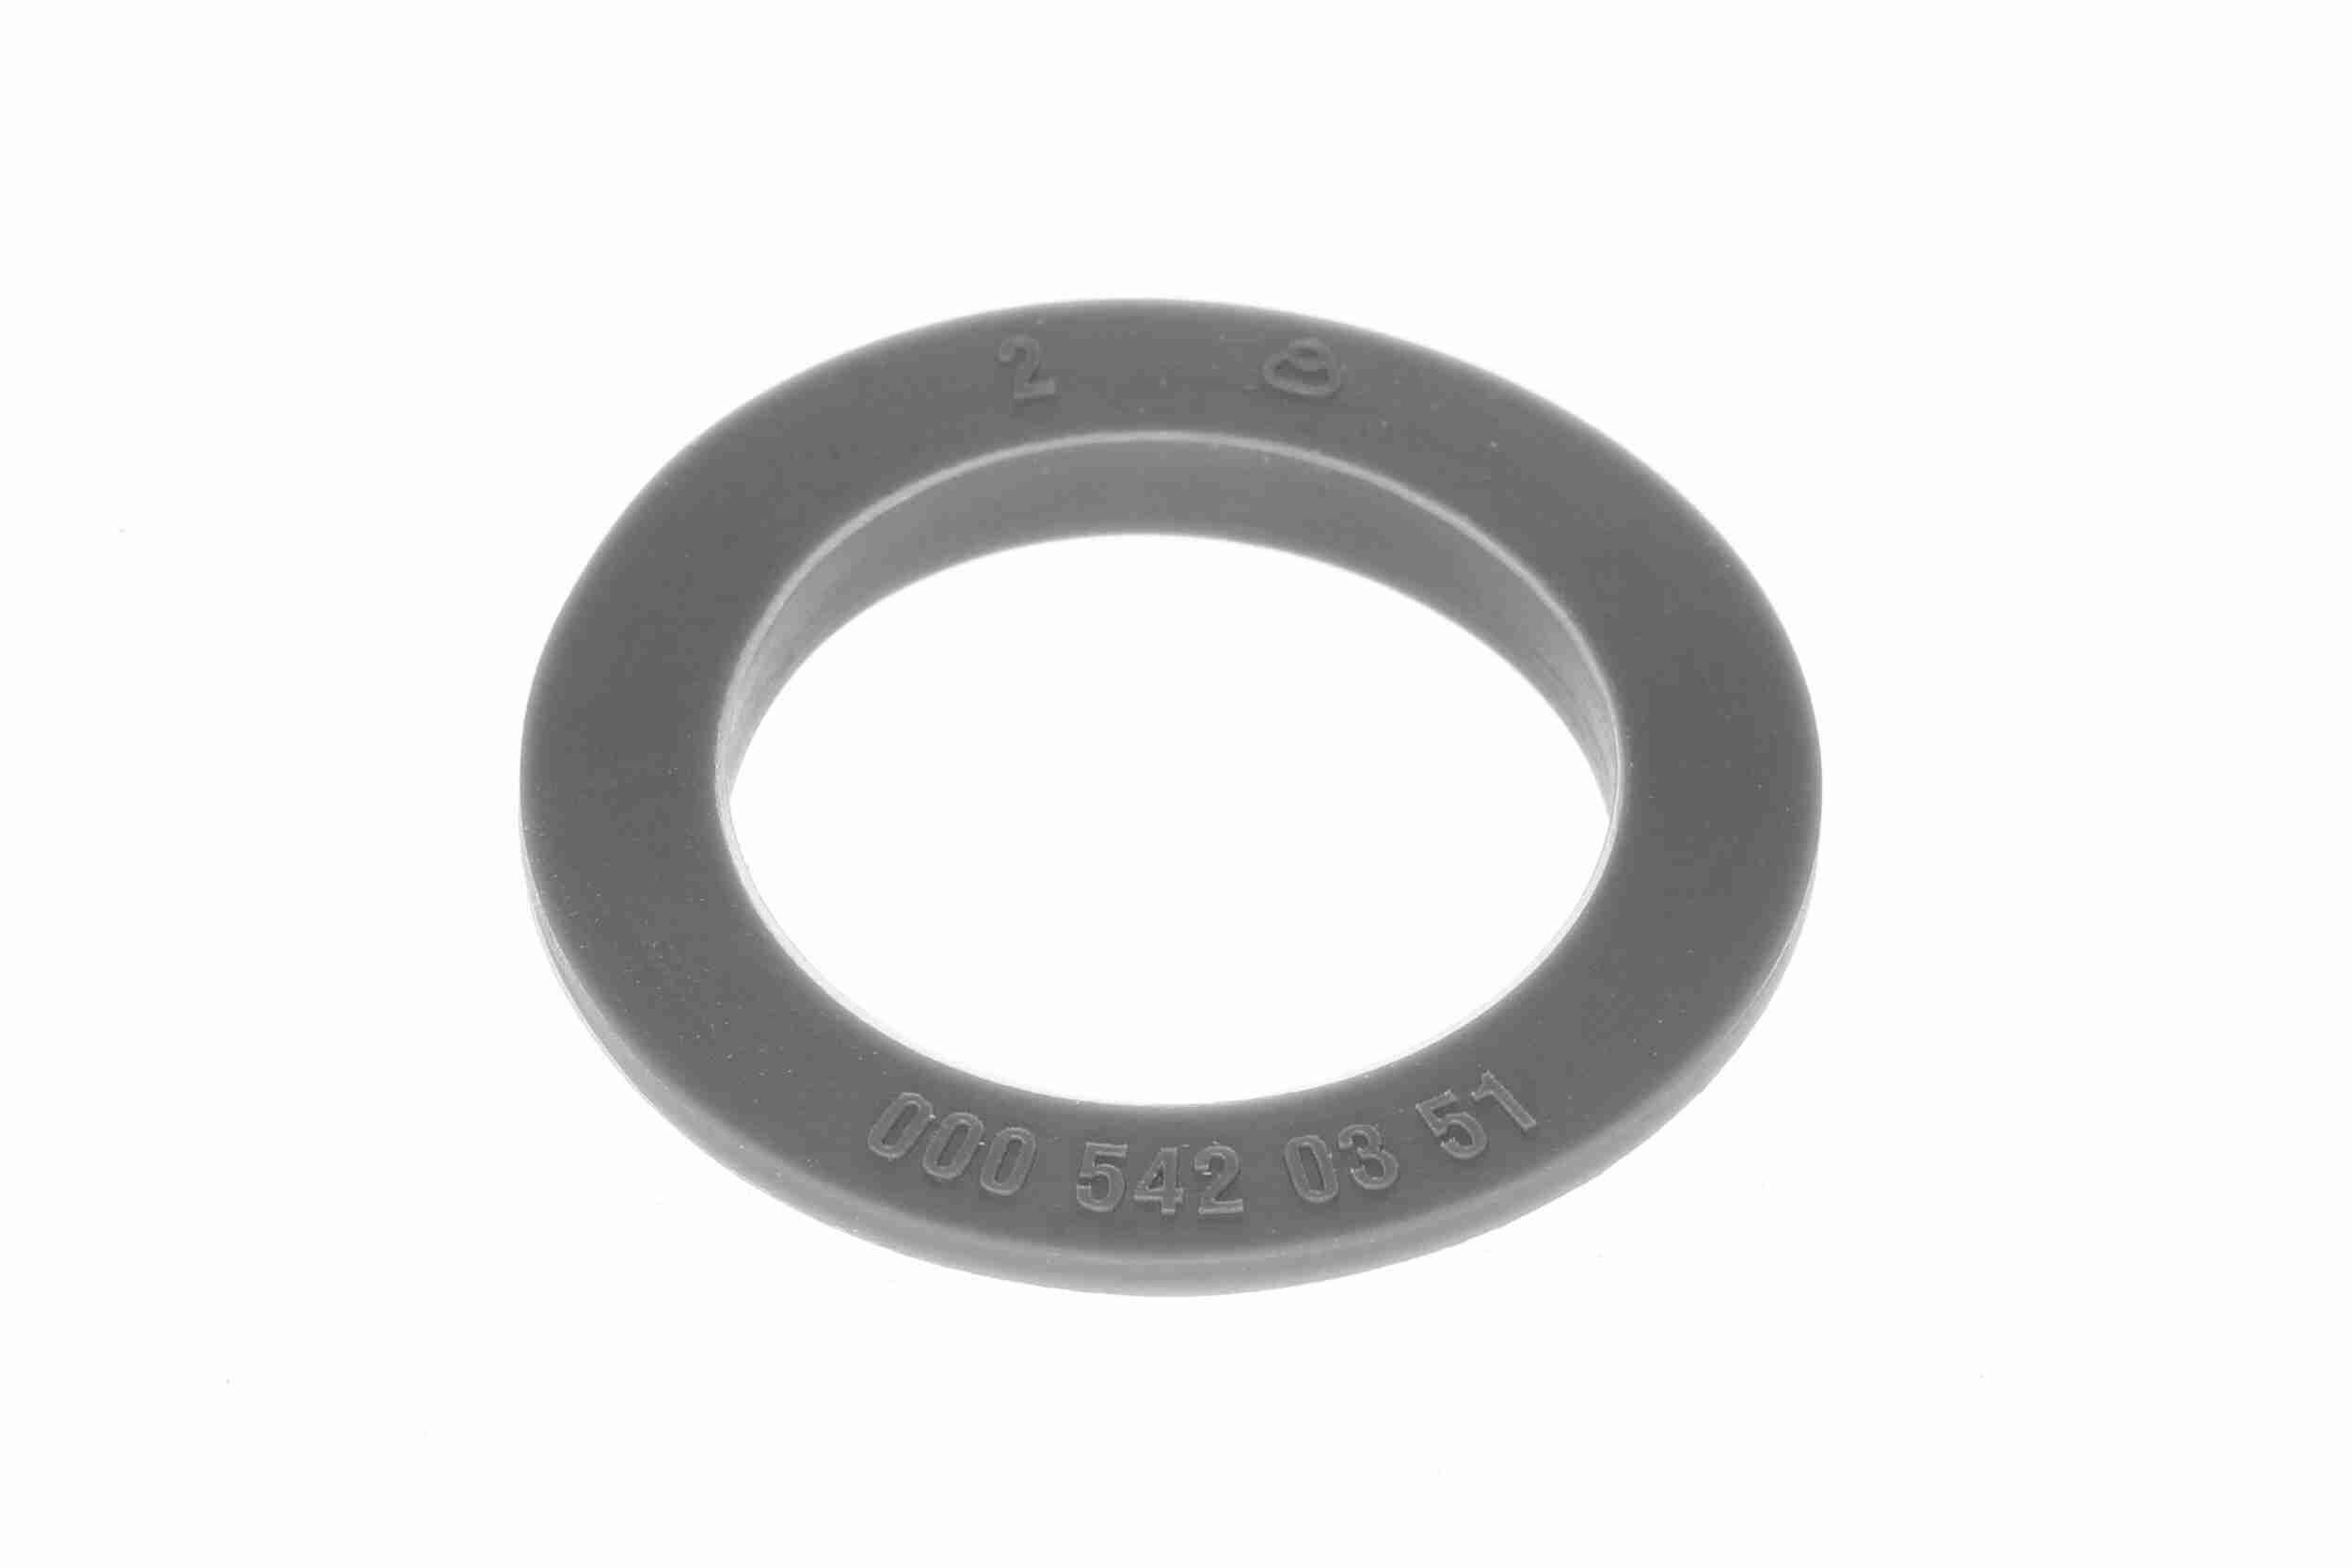 VEMO Seal Ring V99-72-0013 suitable for MERCEDES-BENZ S-Class, E-Class